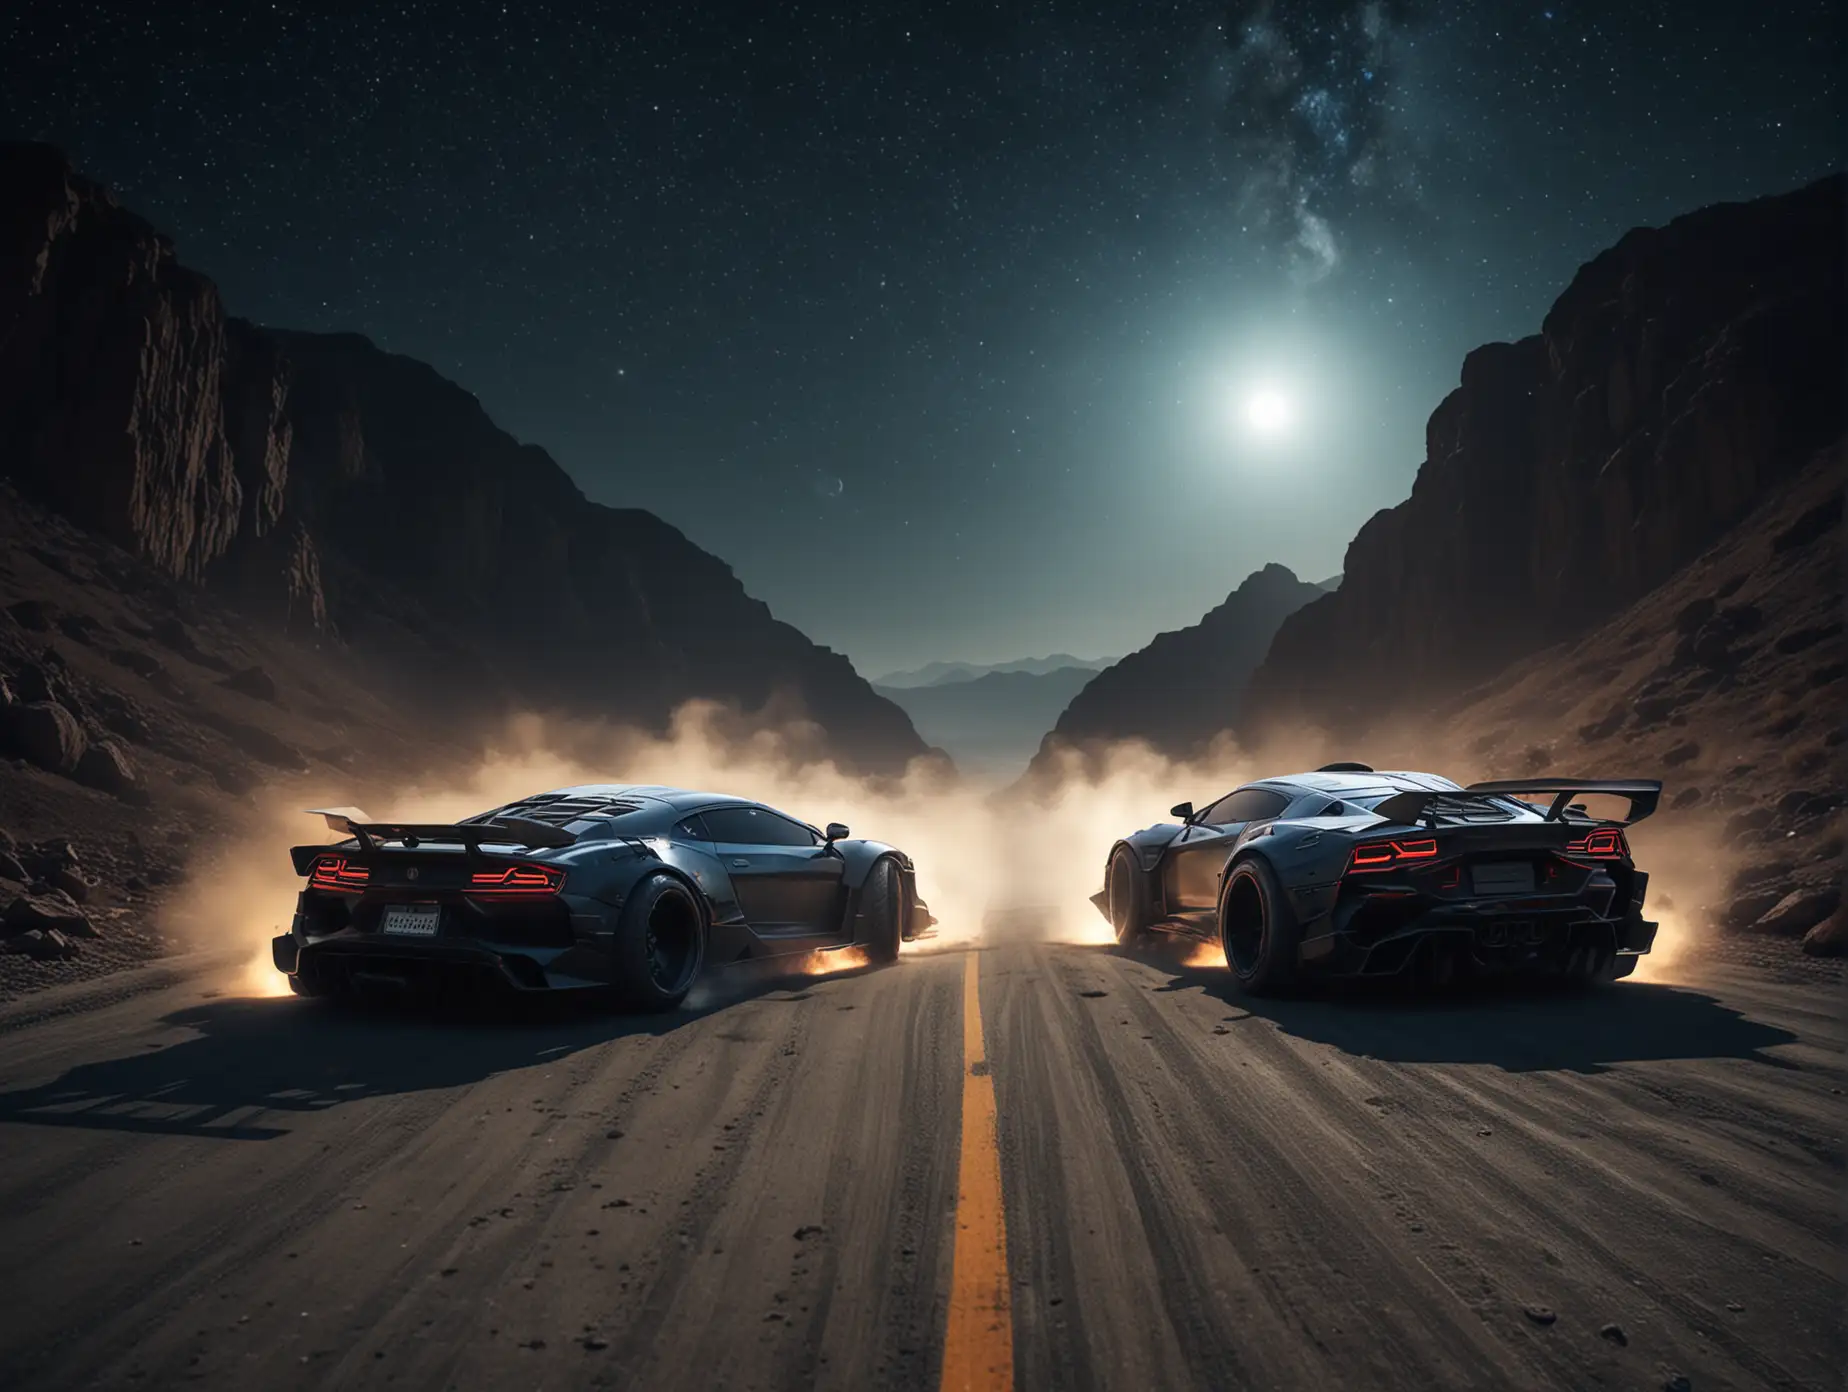 Futuristic-Tiger-and-Lion-Drift-Cars-with-Earth-Background